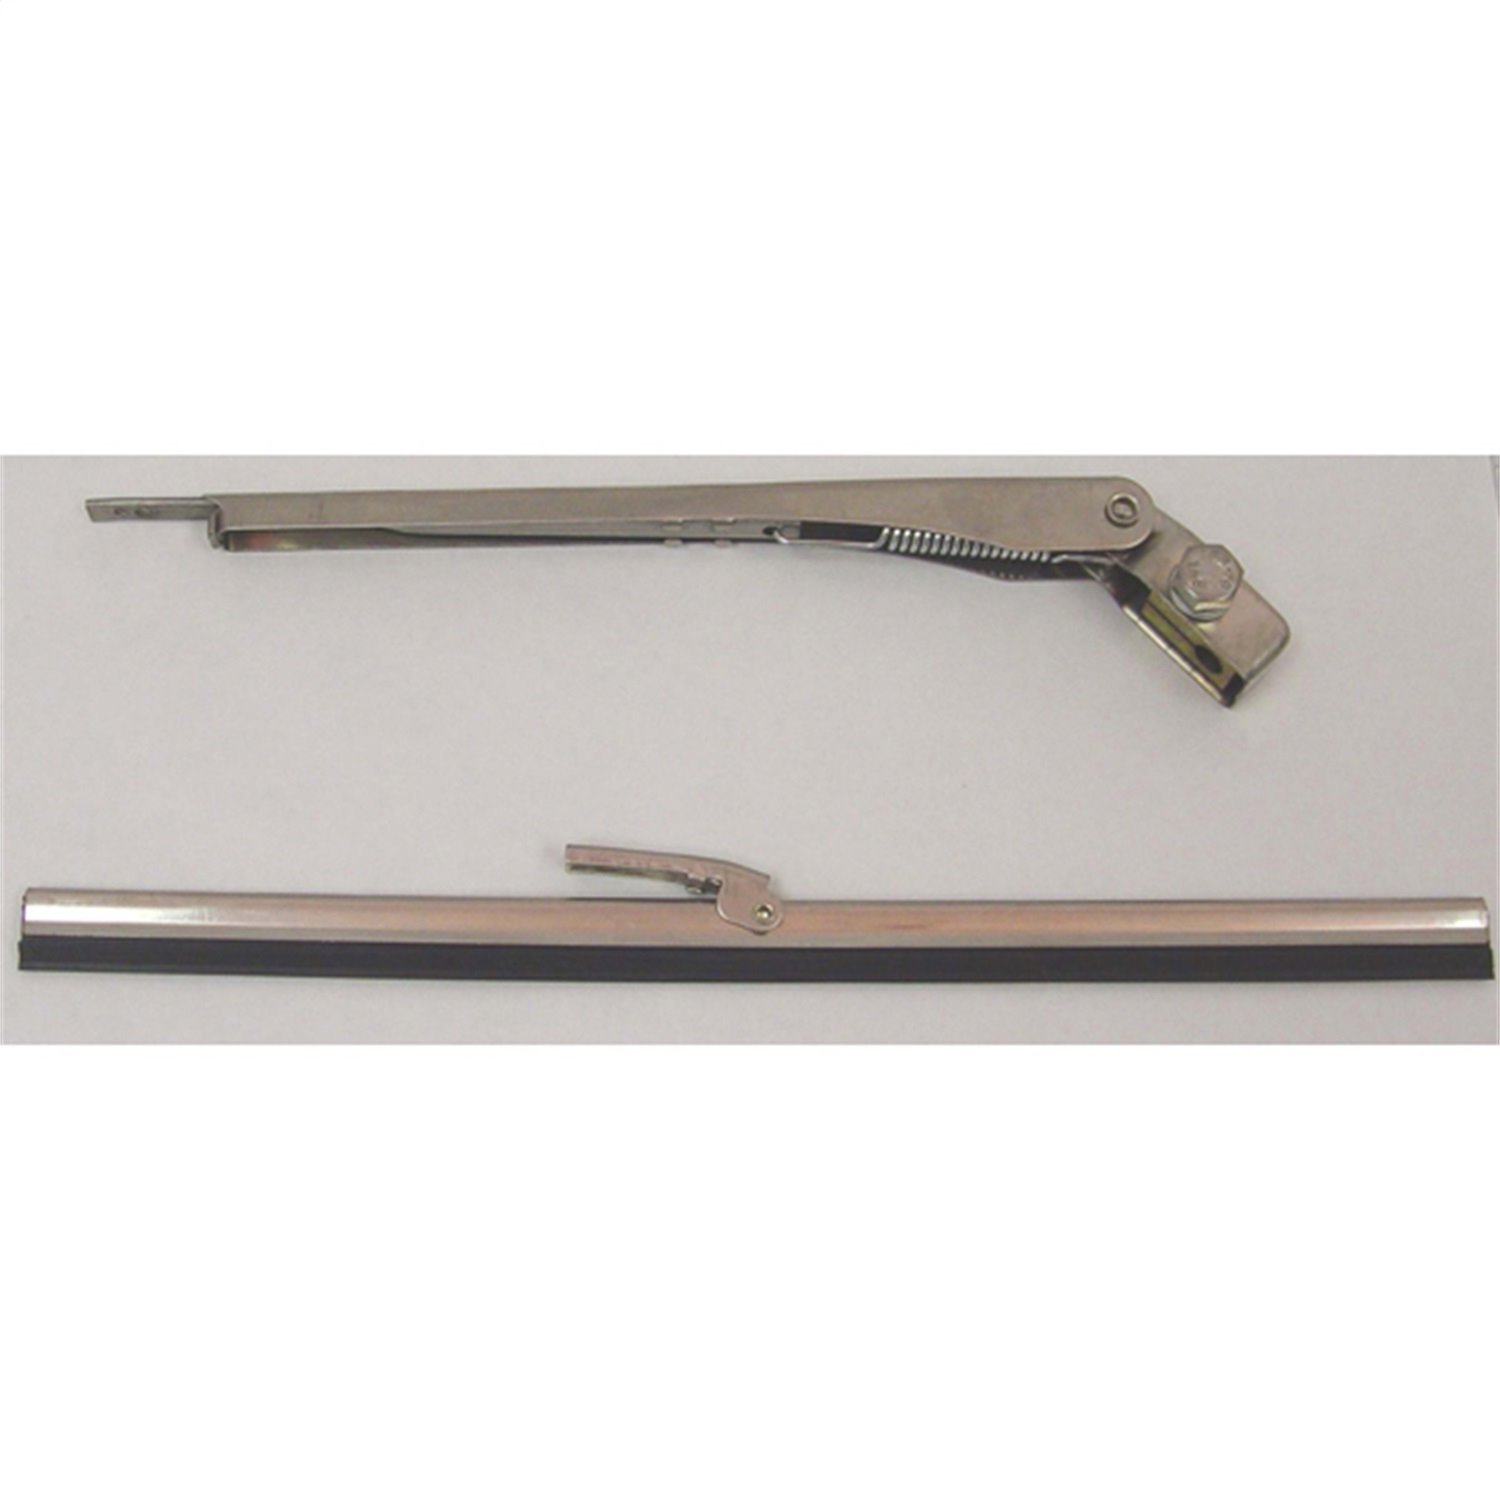 This stainless steel electric windshield wiper arm and blade kit from Omix-ADA fits 41-68 Willys and Jeep models.